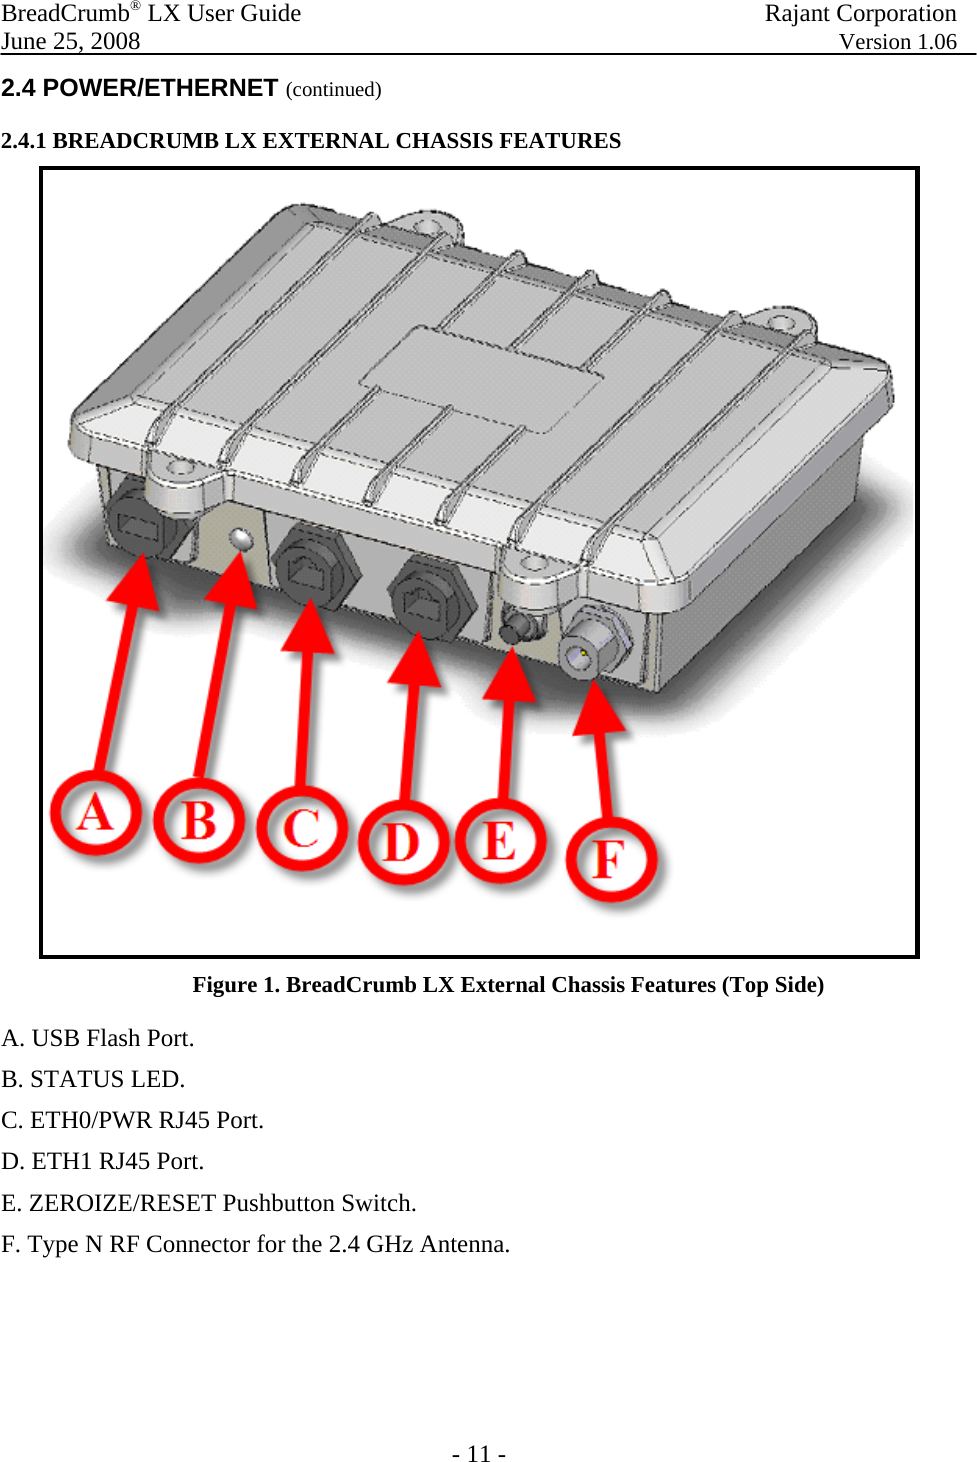 BreadCrumb® LX User Guide  Rajant Corporation  June 25, 2008  Version 1.06 - 11 - 2.4 POWER/ETHERNET (continued) 2.4.1 BREADCRUMB LX EXTERNAL CHASSIS FEATURES  Figure 1. BreadCrumb LX External Chassis Features (Top Side) A. USB Flash Port. B. STATUS LED. C. ETH0/PWR RJ45 Port. D. ETH1 RJ45 Port. E. ZEROIZE/RESET Pushbutton Switch. F. Type N RF Connector for the 2.4 GHz Antenna. 